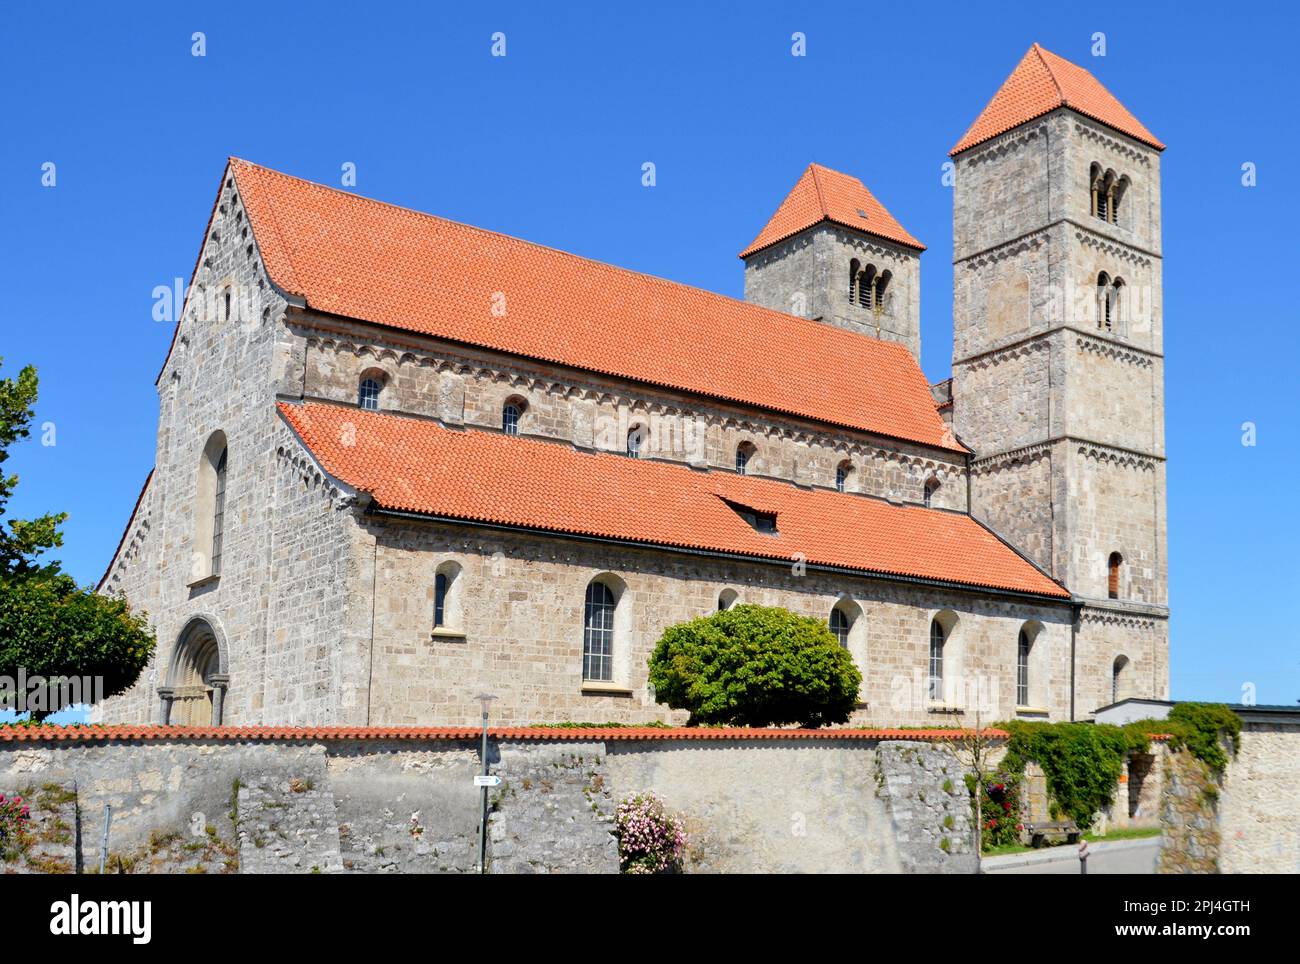 Germany, Bavaria, Altenstadt (formerly Alt-Schongau):  the Romanesque parish church and Papal basilica was probably built between 1180 and 1220 and ha Stock Photo